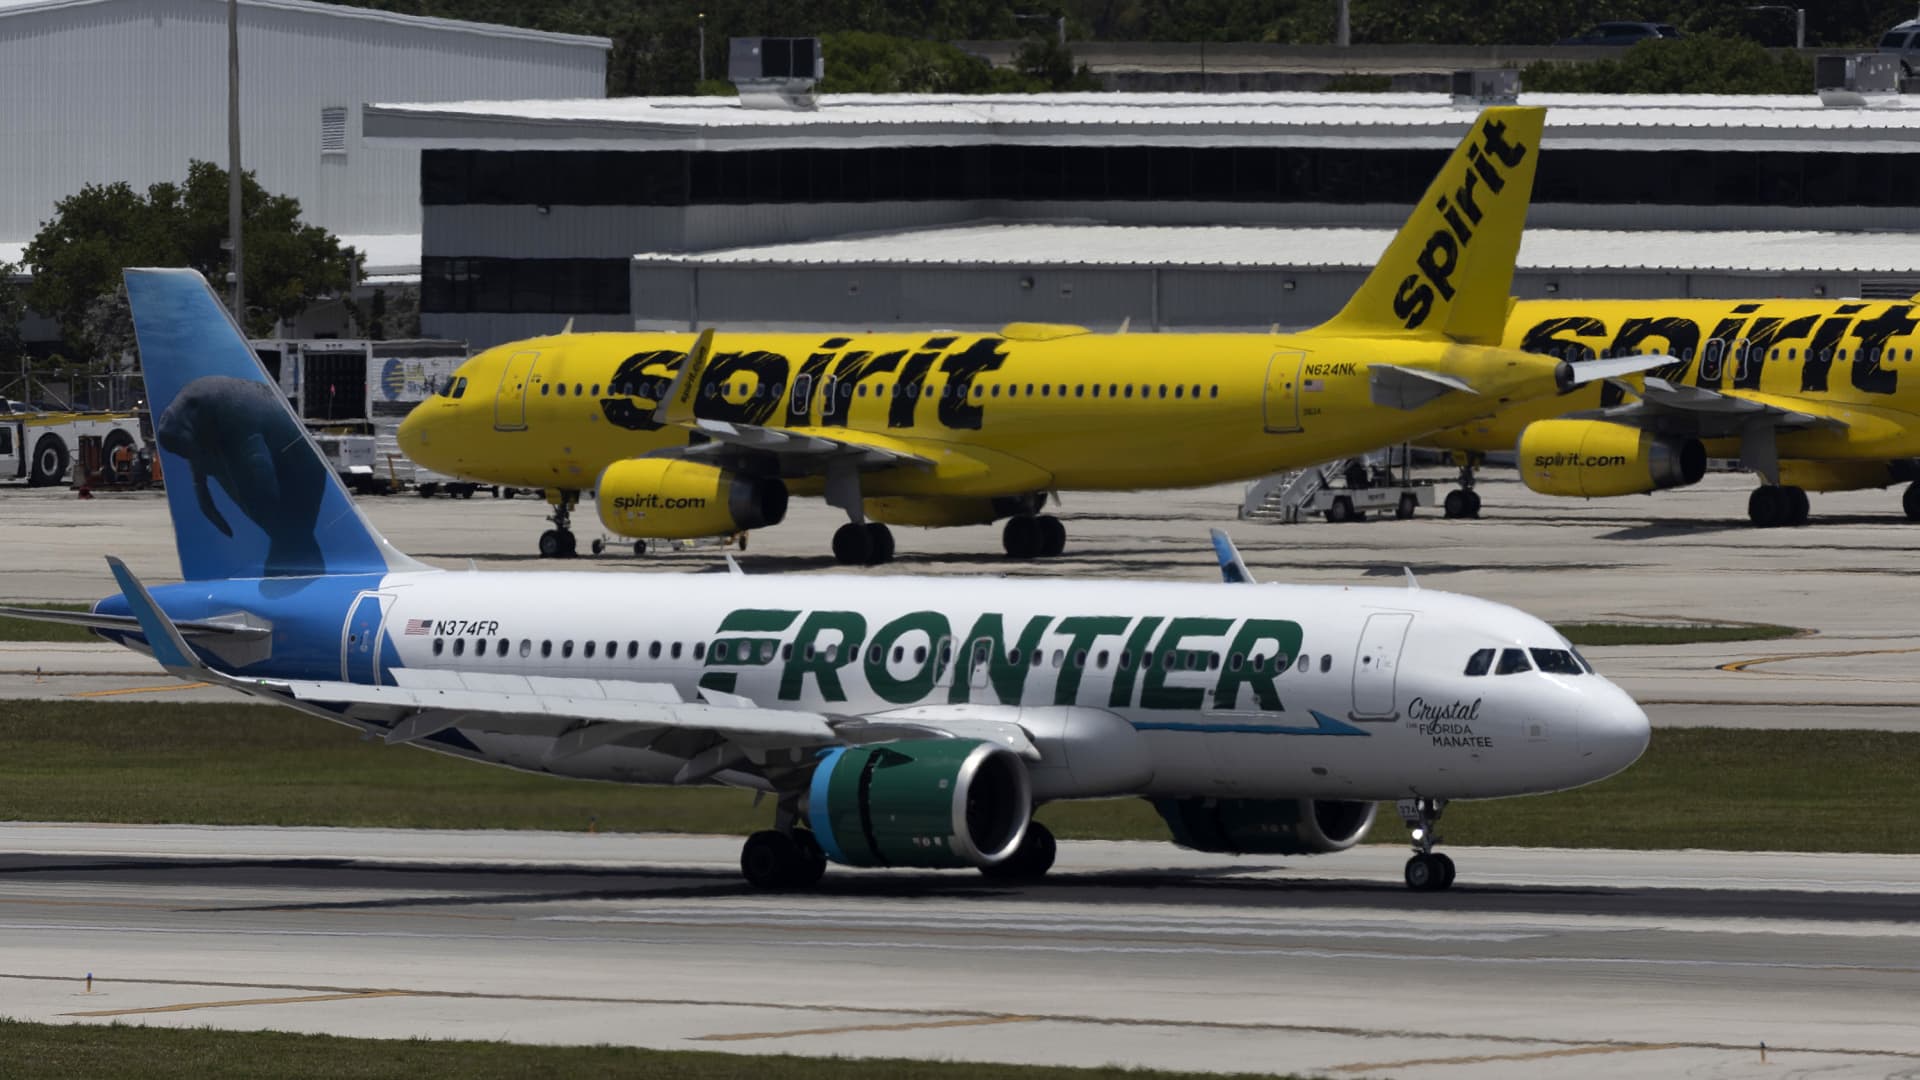 Frontier, JetBlue battle over Spirit Airlines goes down to the wire with competing bids